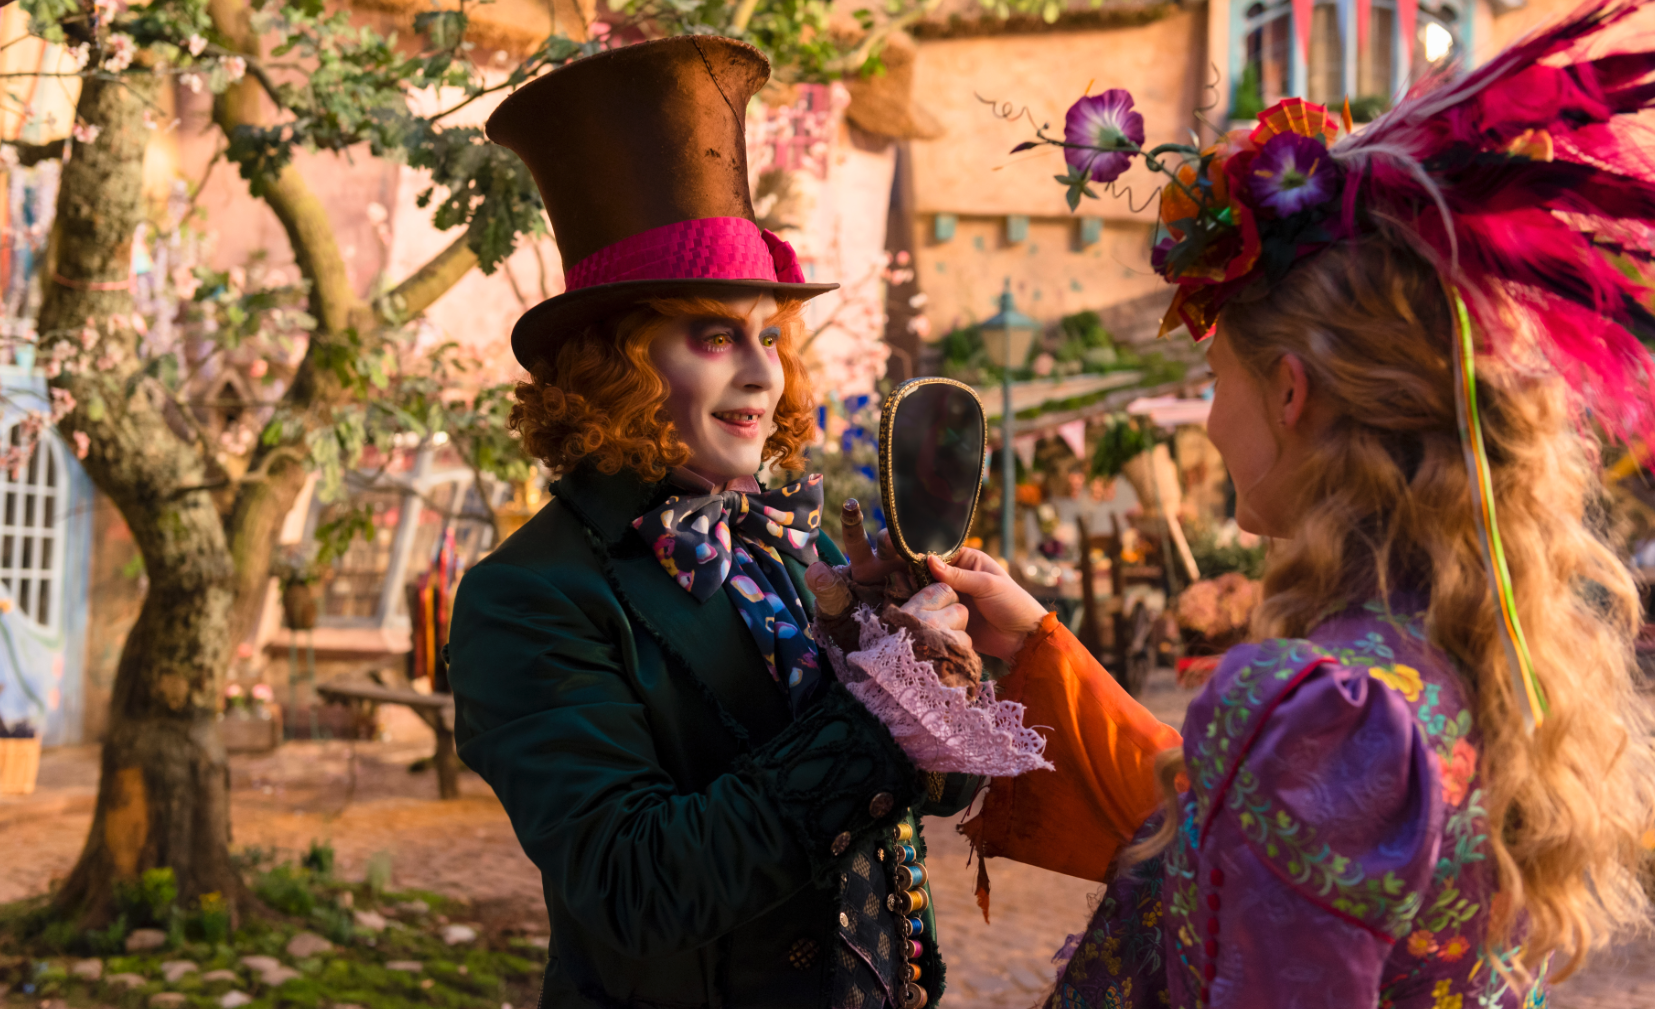 Manners McDade's Tim Phillips Features in New Alice Through The Looking Glass Trailer